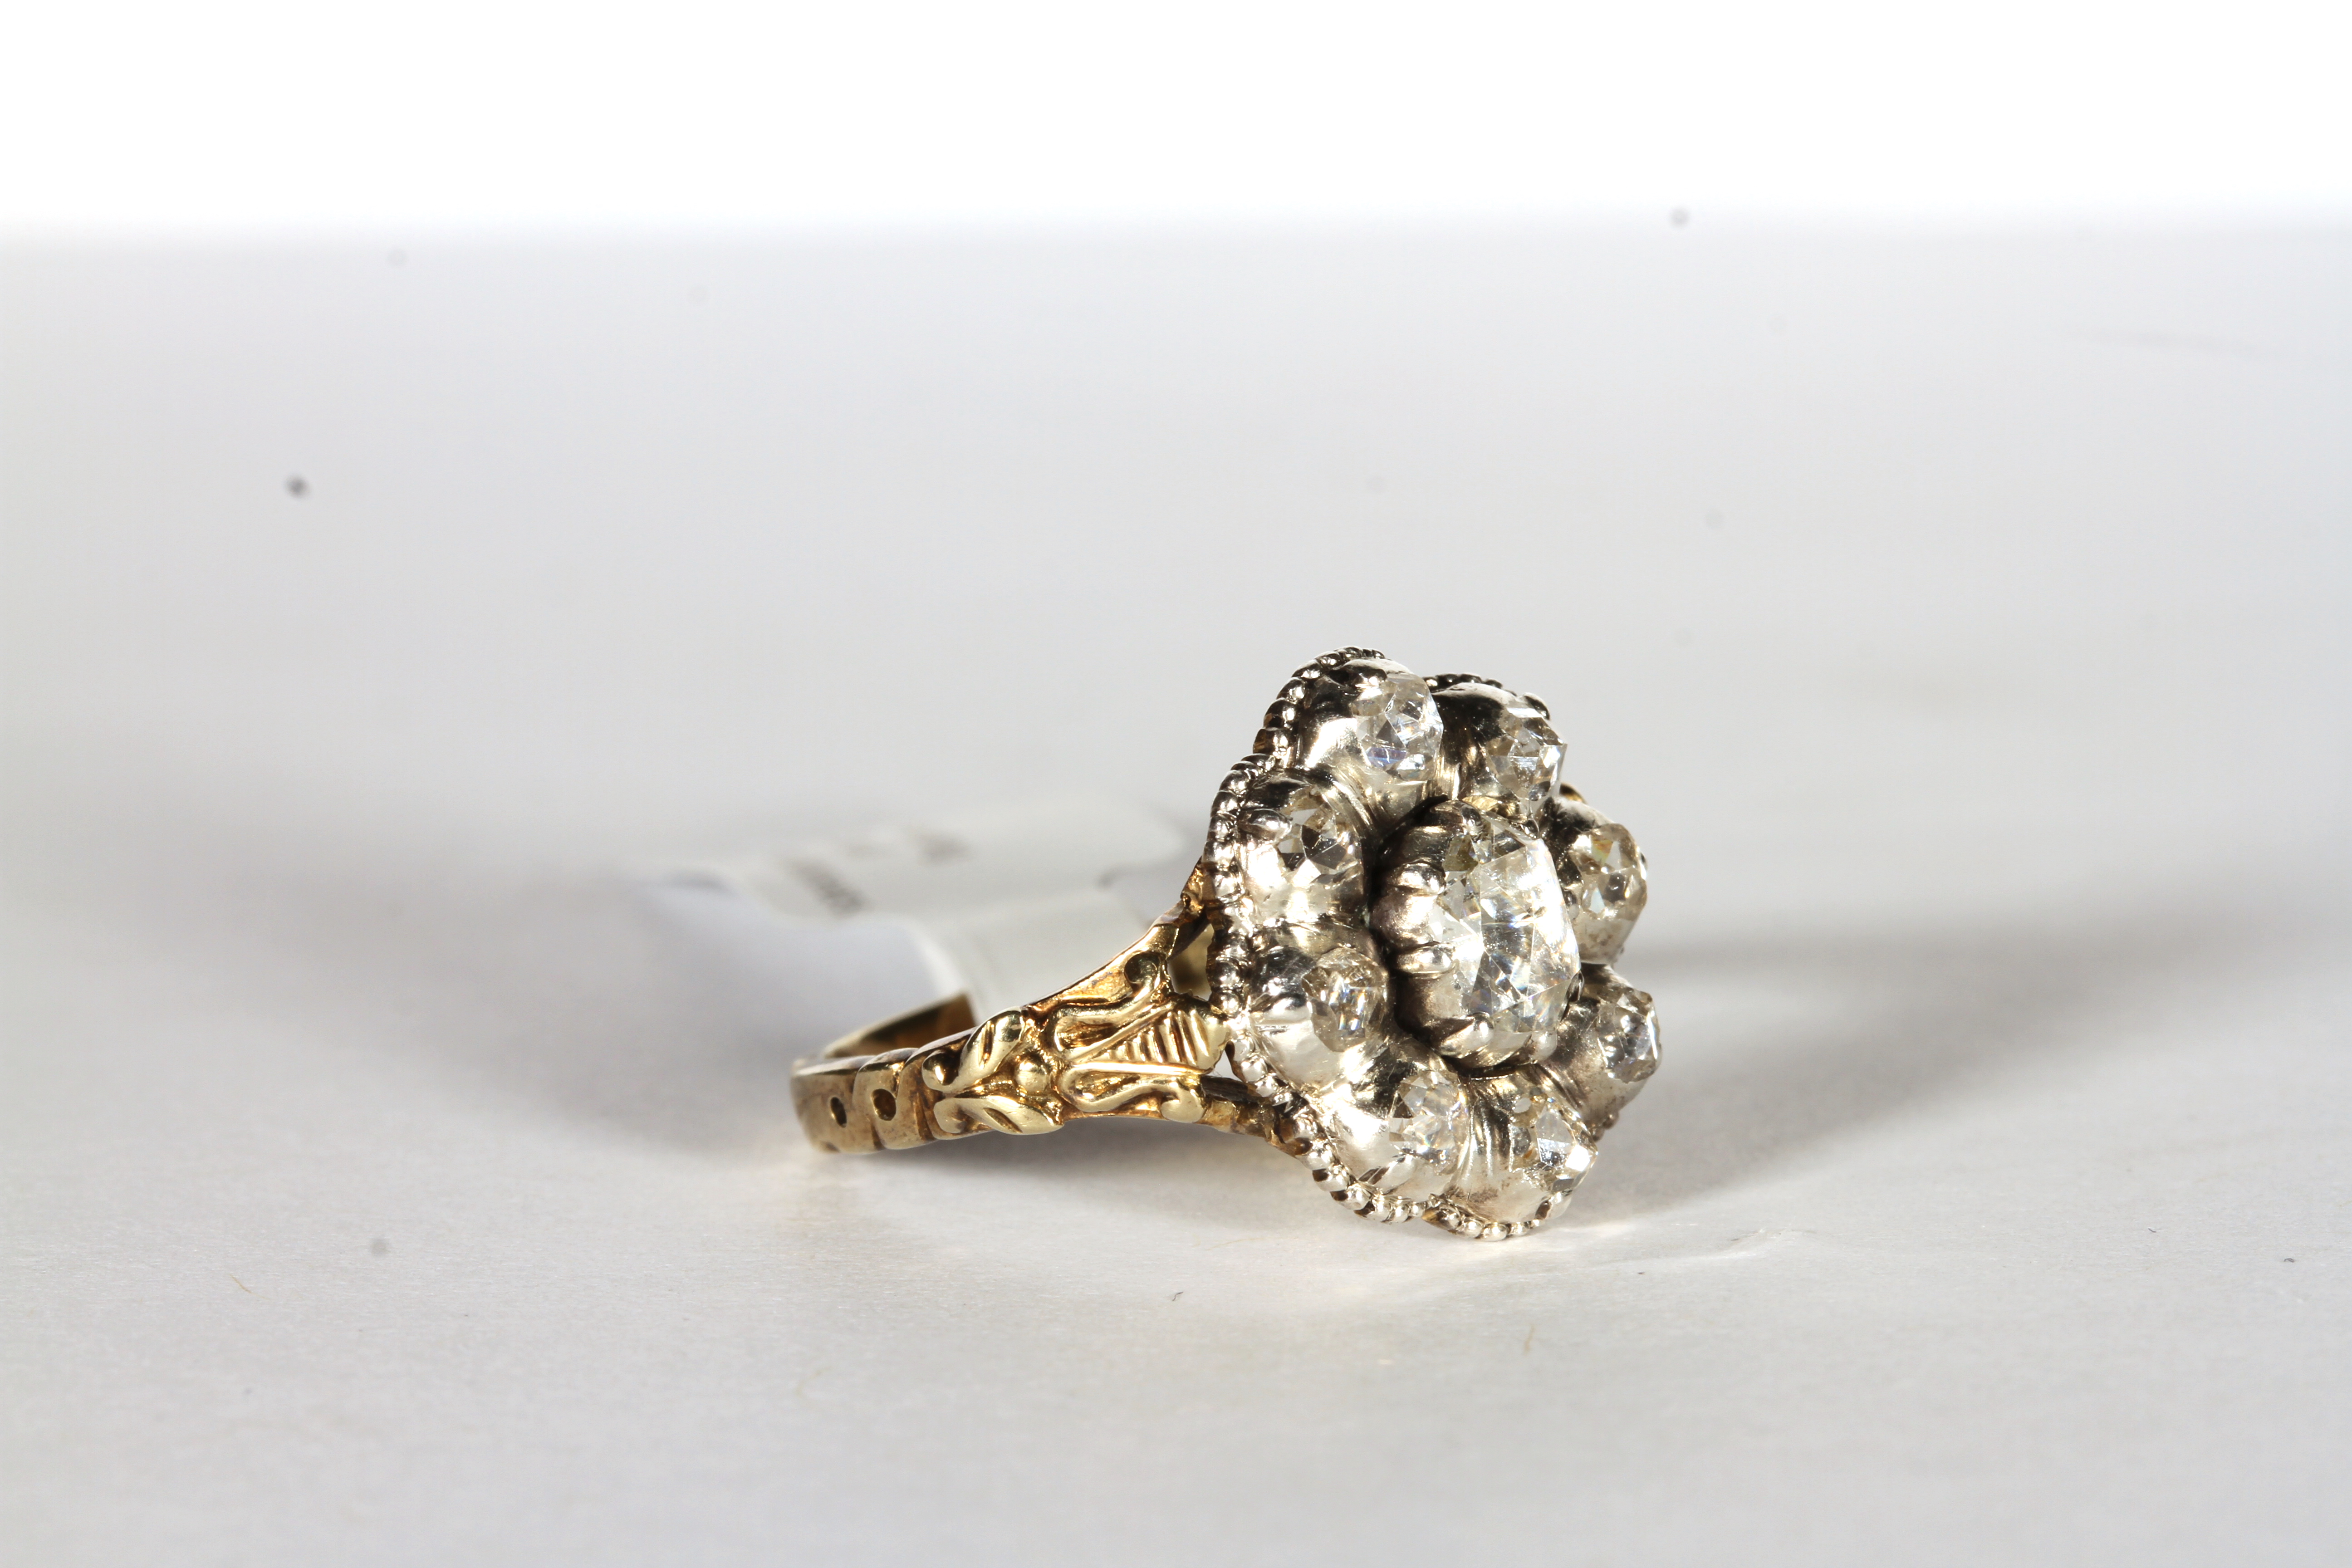 Early Rose Cut Diamond Cluster Ring, central bright Rose cut diamond, approximately 4.4x2.2mm - Image 2 of 4